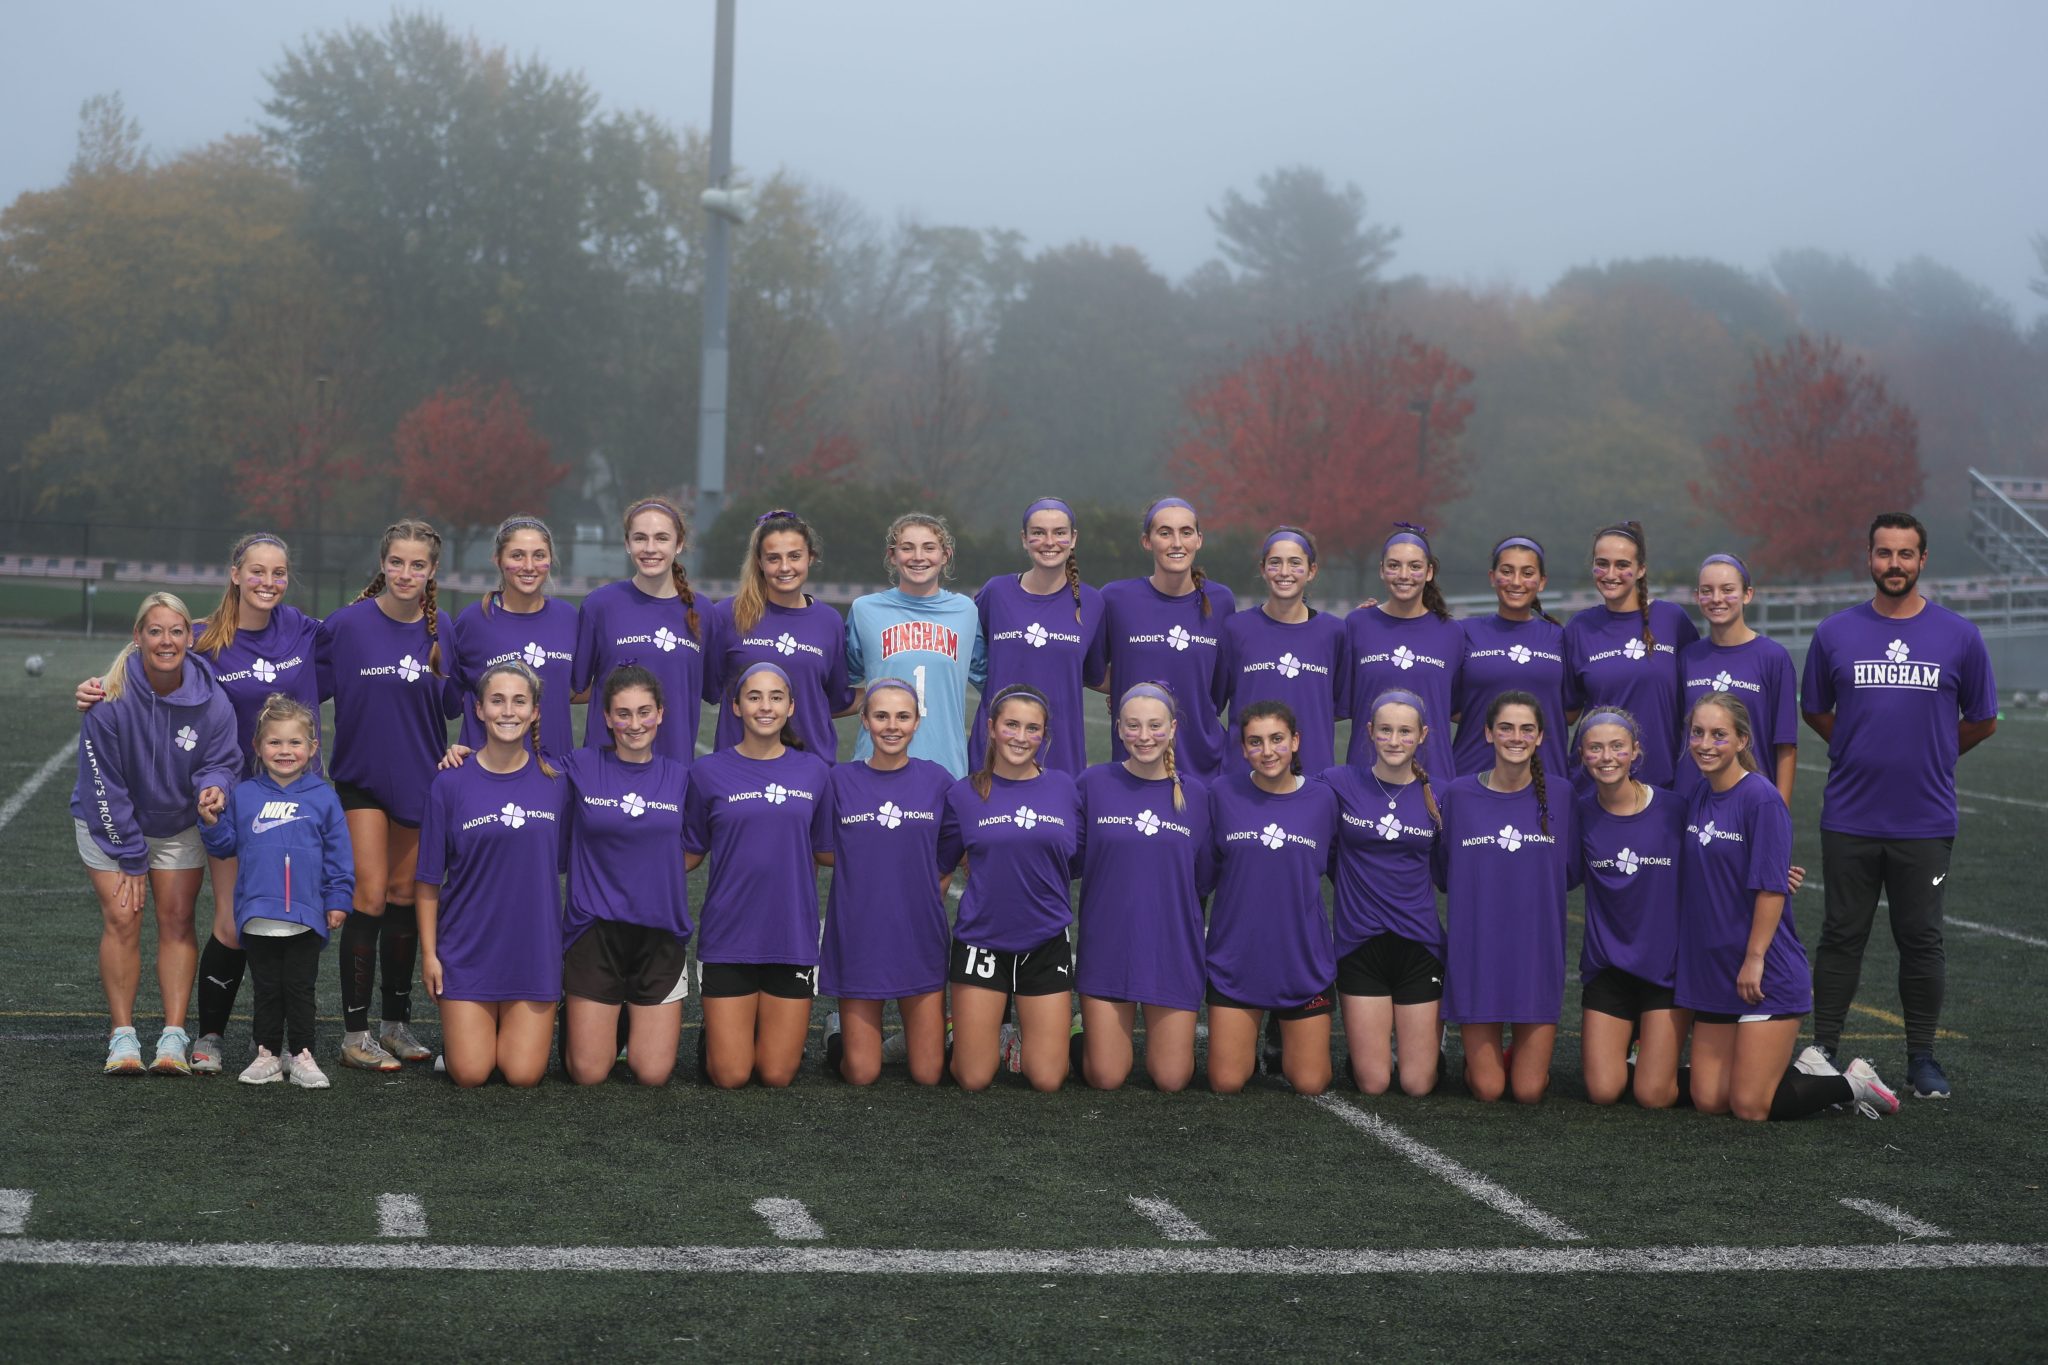 A pregame team photo of the 22/23 Hingham Girls Soccer team before the Maddie's Promise game. 